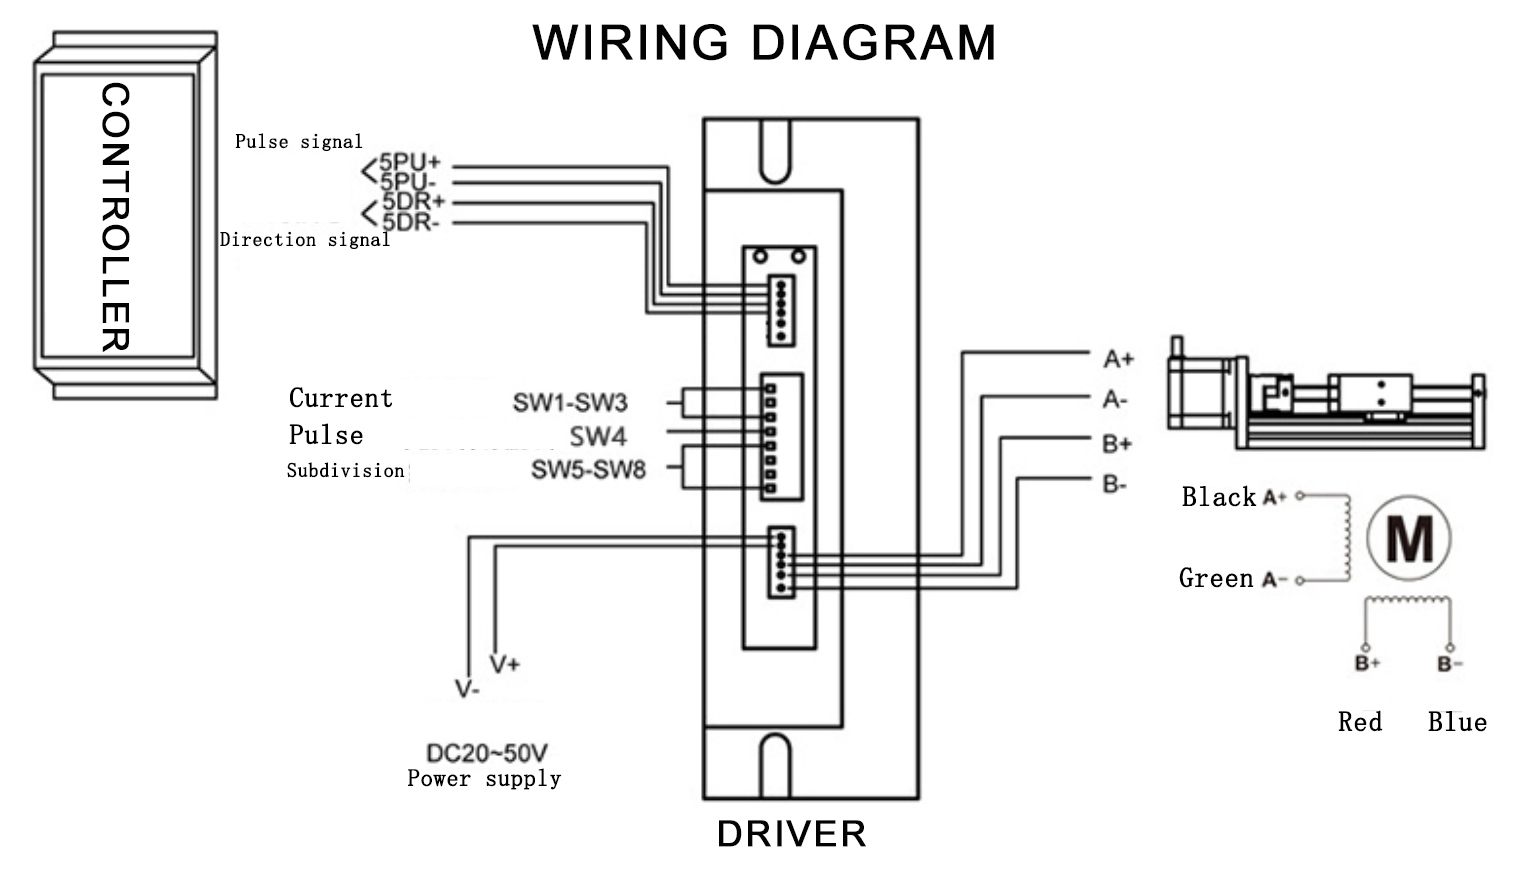 Linear module connection drawing